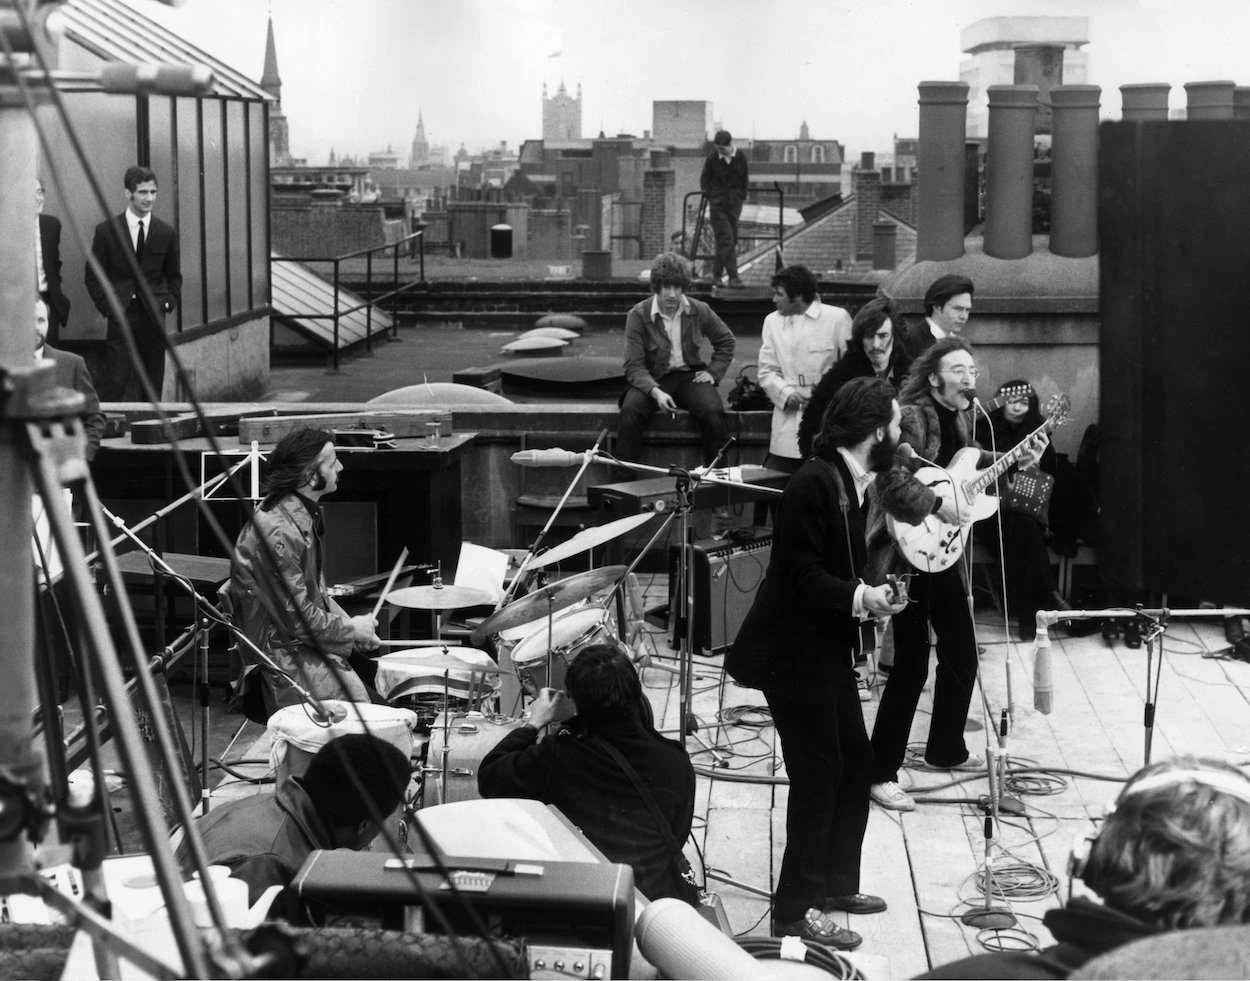 John Lennon (right), who once compared The Beatles breaking up to falling in love, plays the rooftop concert with The Beatles in 1969.